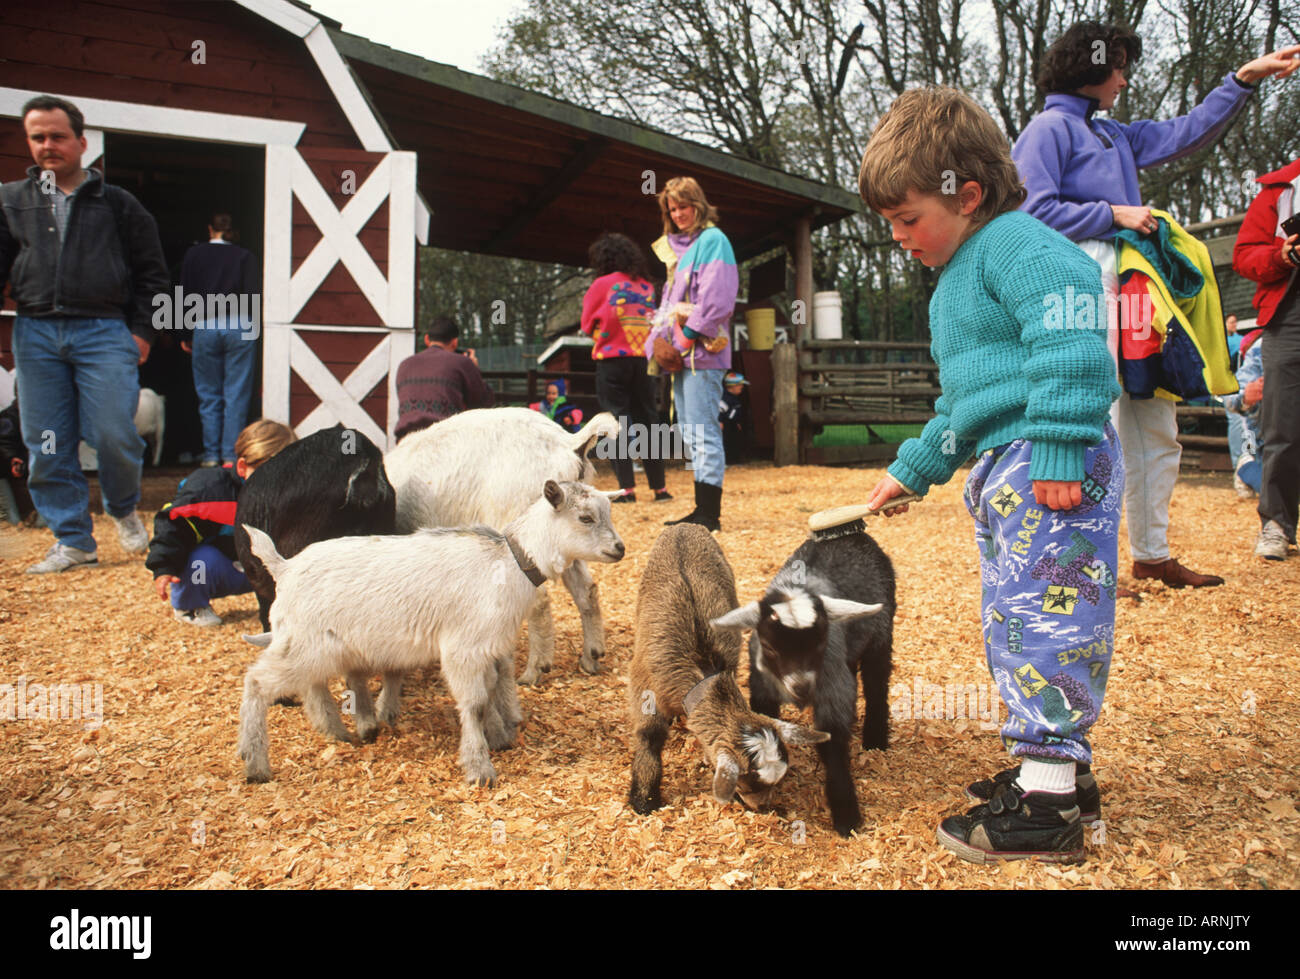 Young boy petting a goat in the petting zoo in Beacon Hill Park, Victoria, Vancouver Island, British Columbia, Canada. Stock Photo